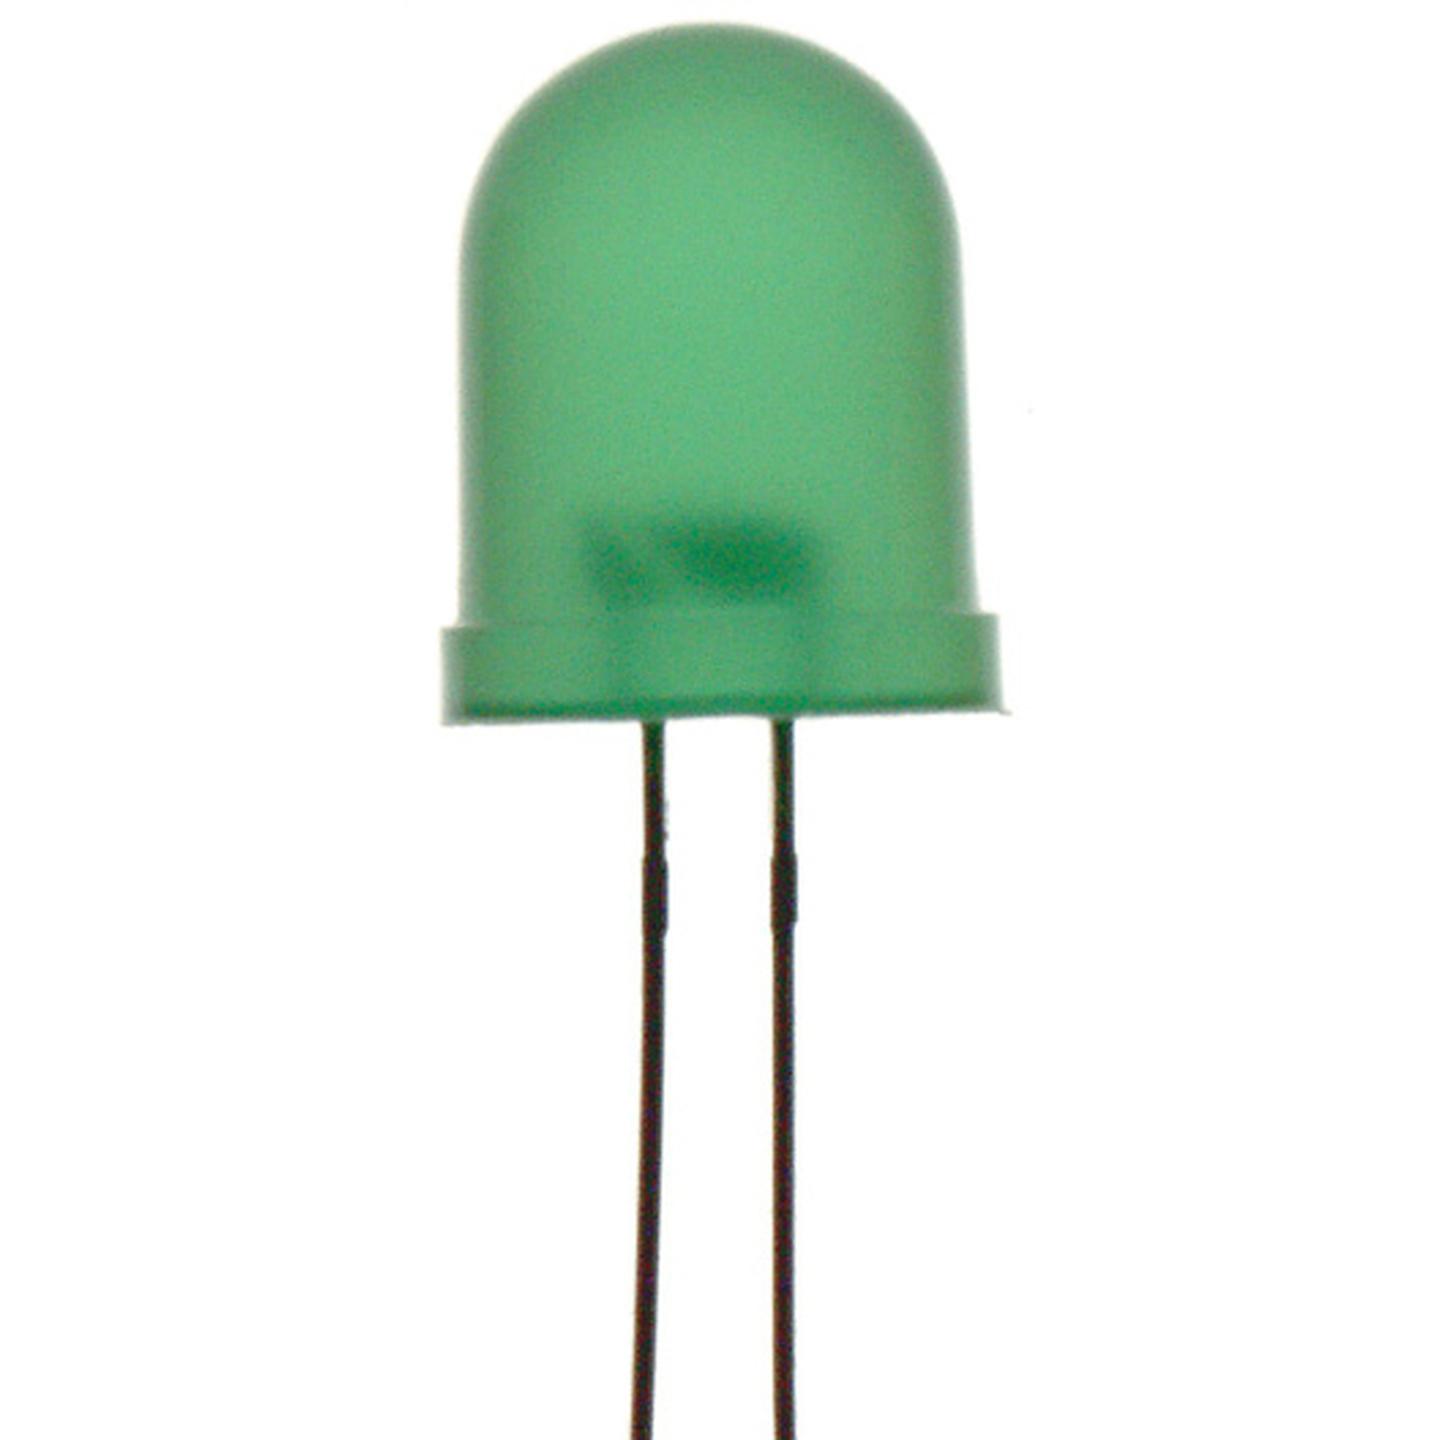 Green 5mm LED 80mcd Round Diffused